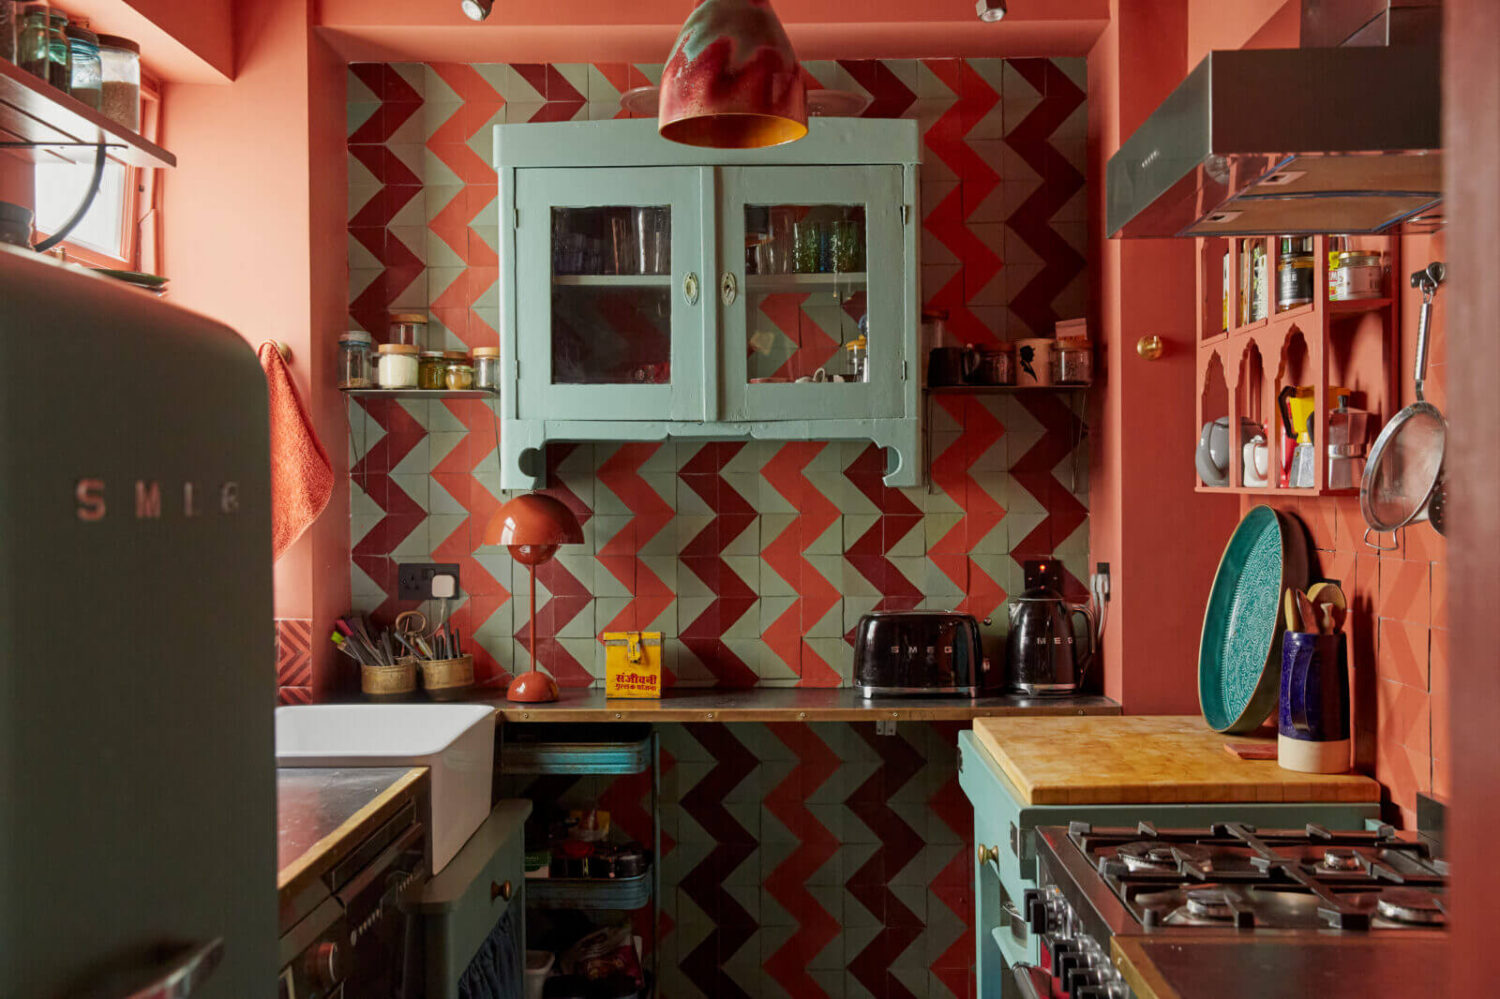 galley-kitchen-edward-bulmer-red-ochre-jaggery-hand-painted-tiles-nordroom